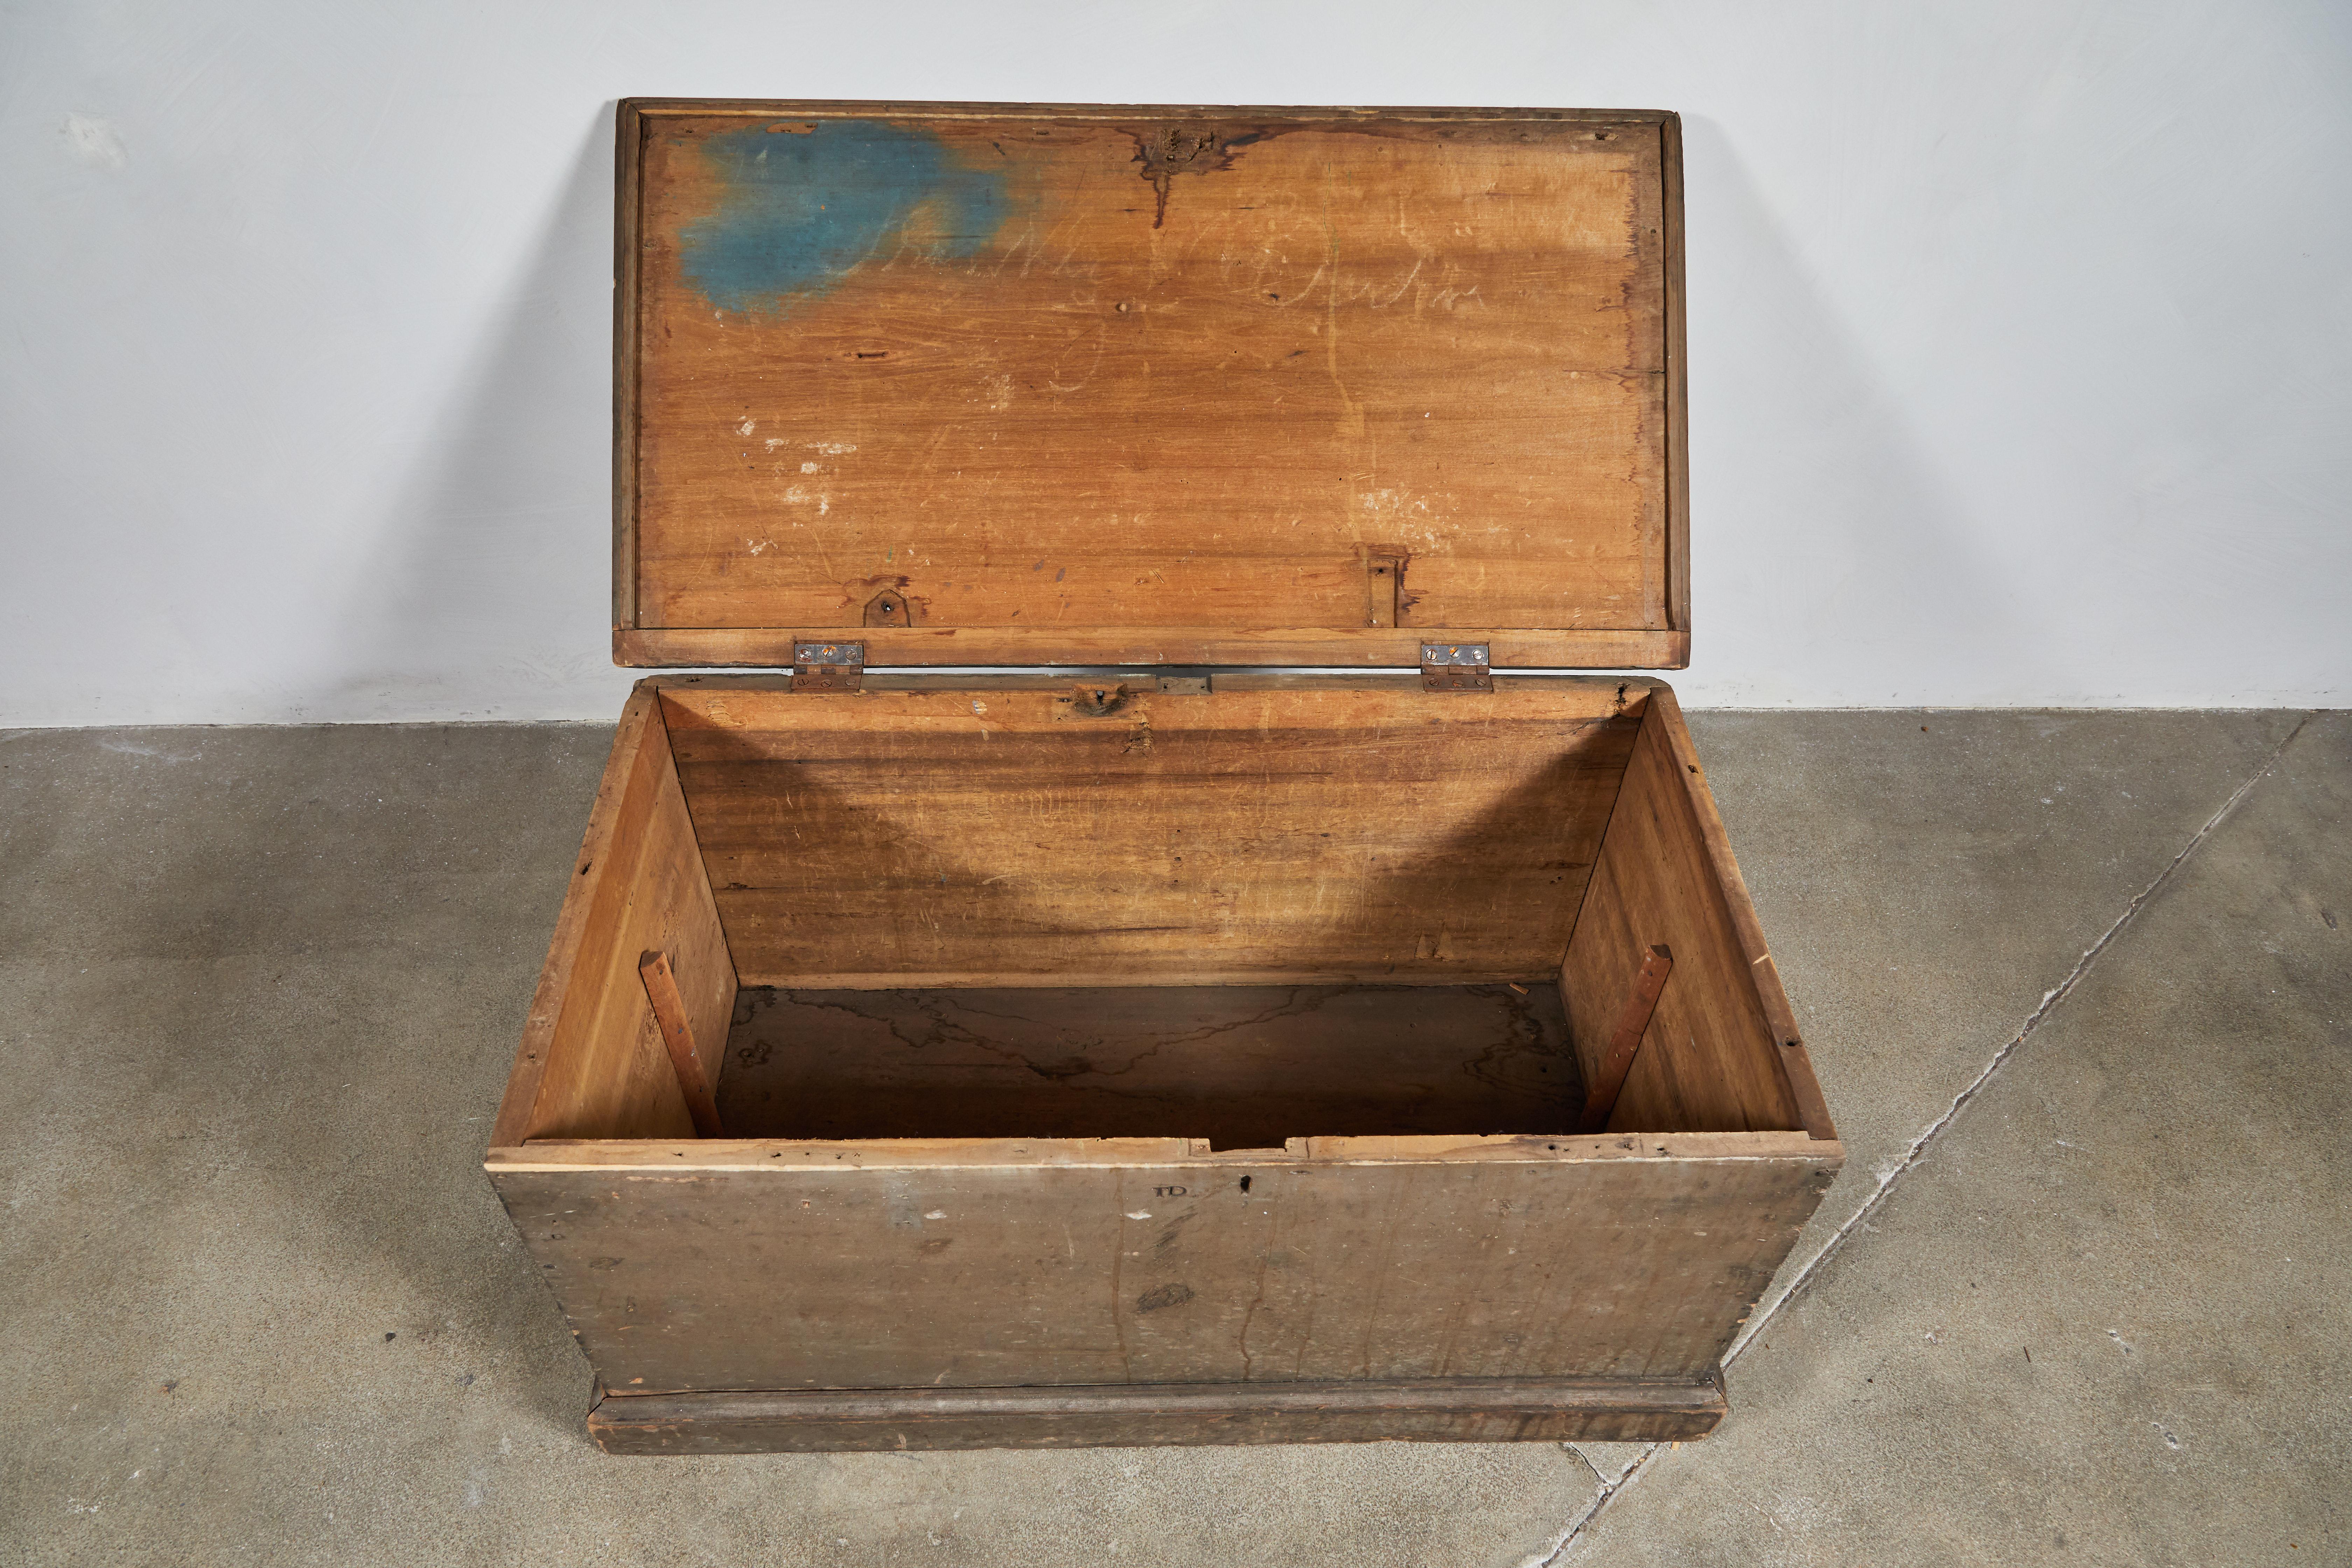 North American Early American Storage Trunk